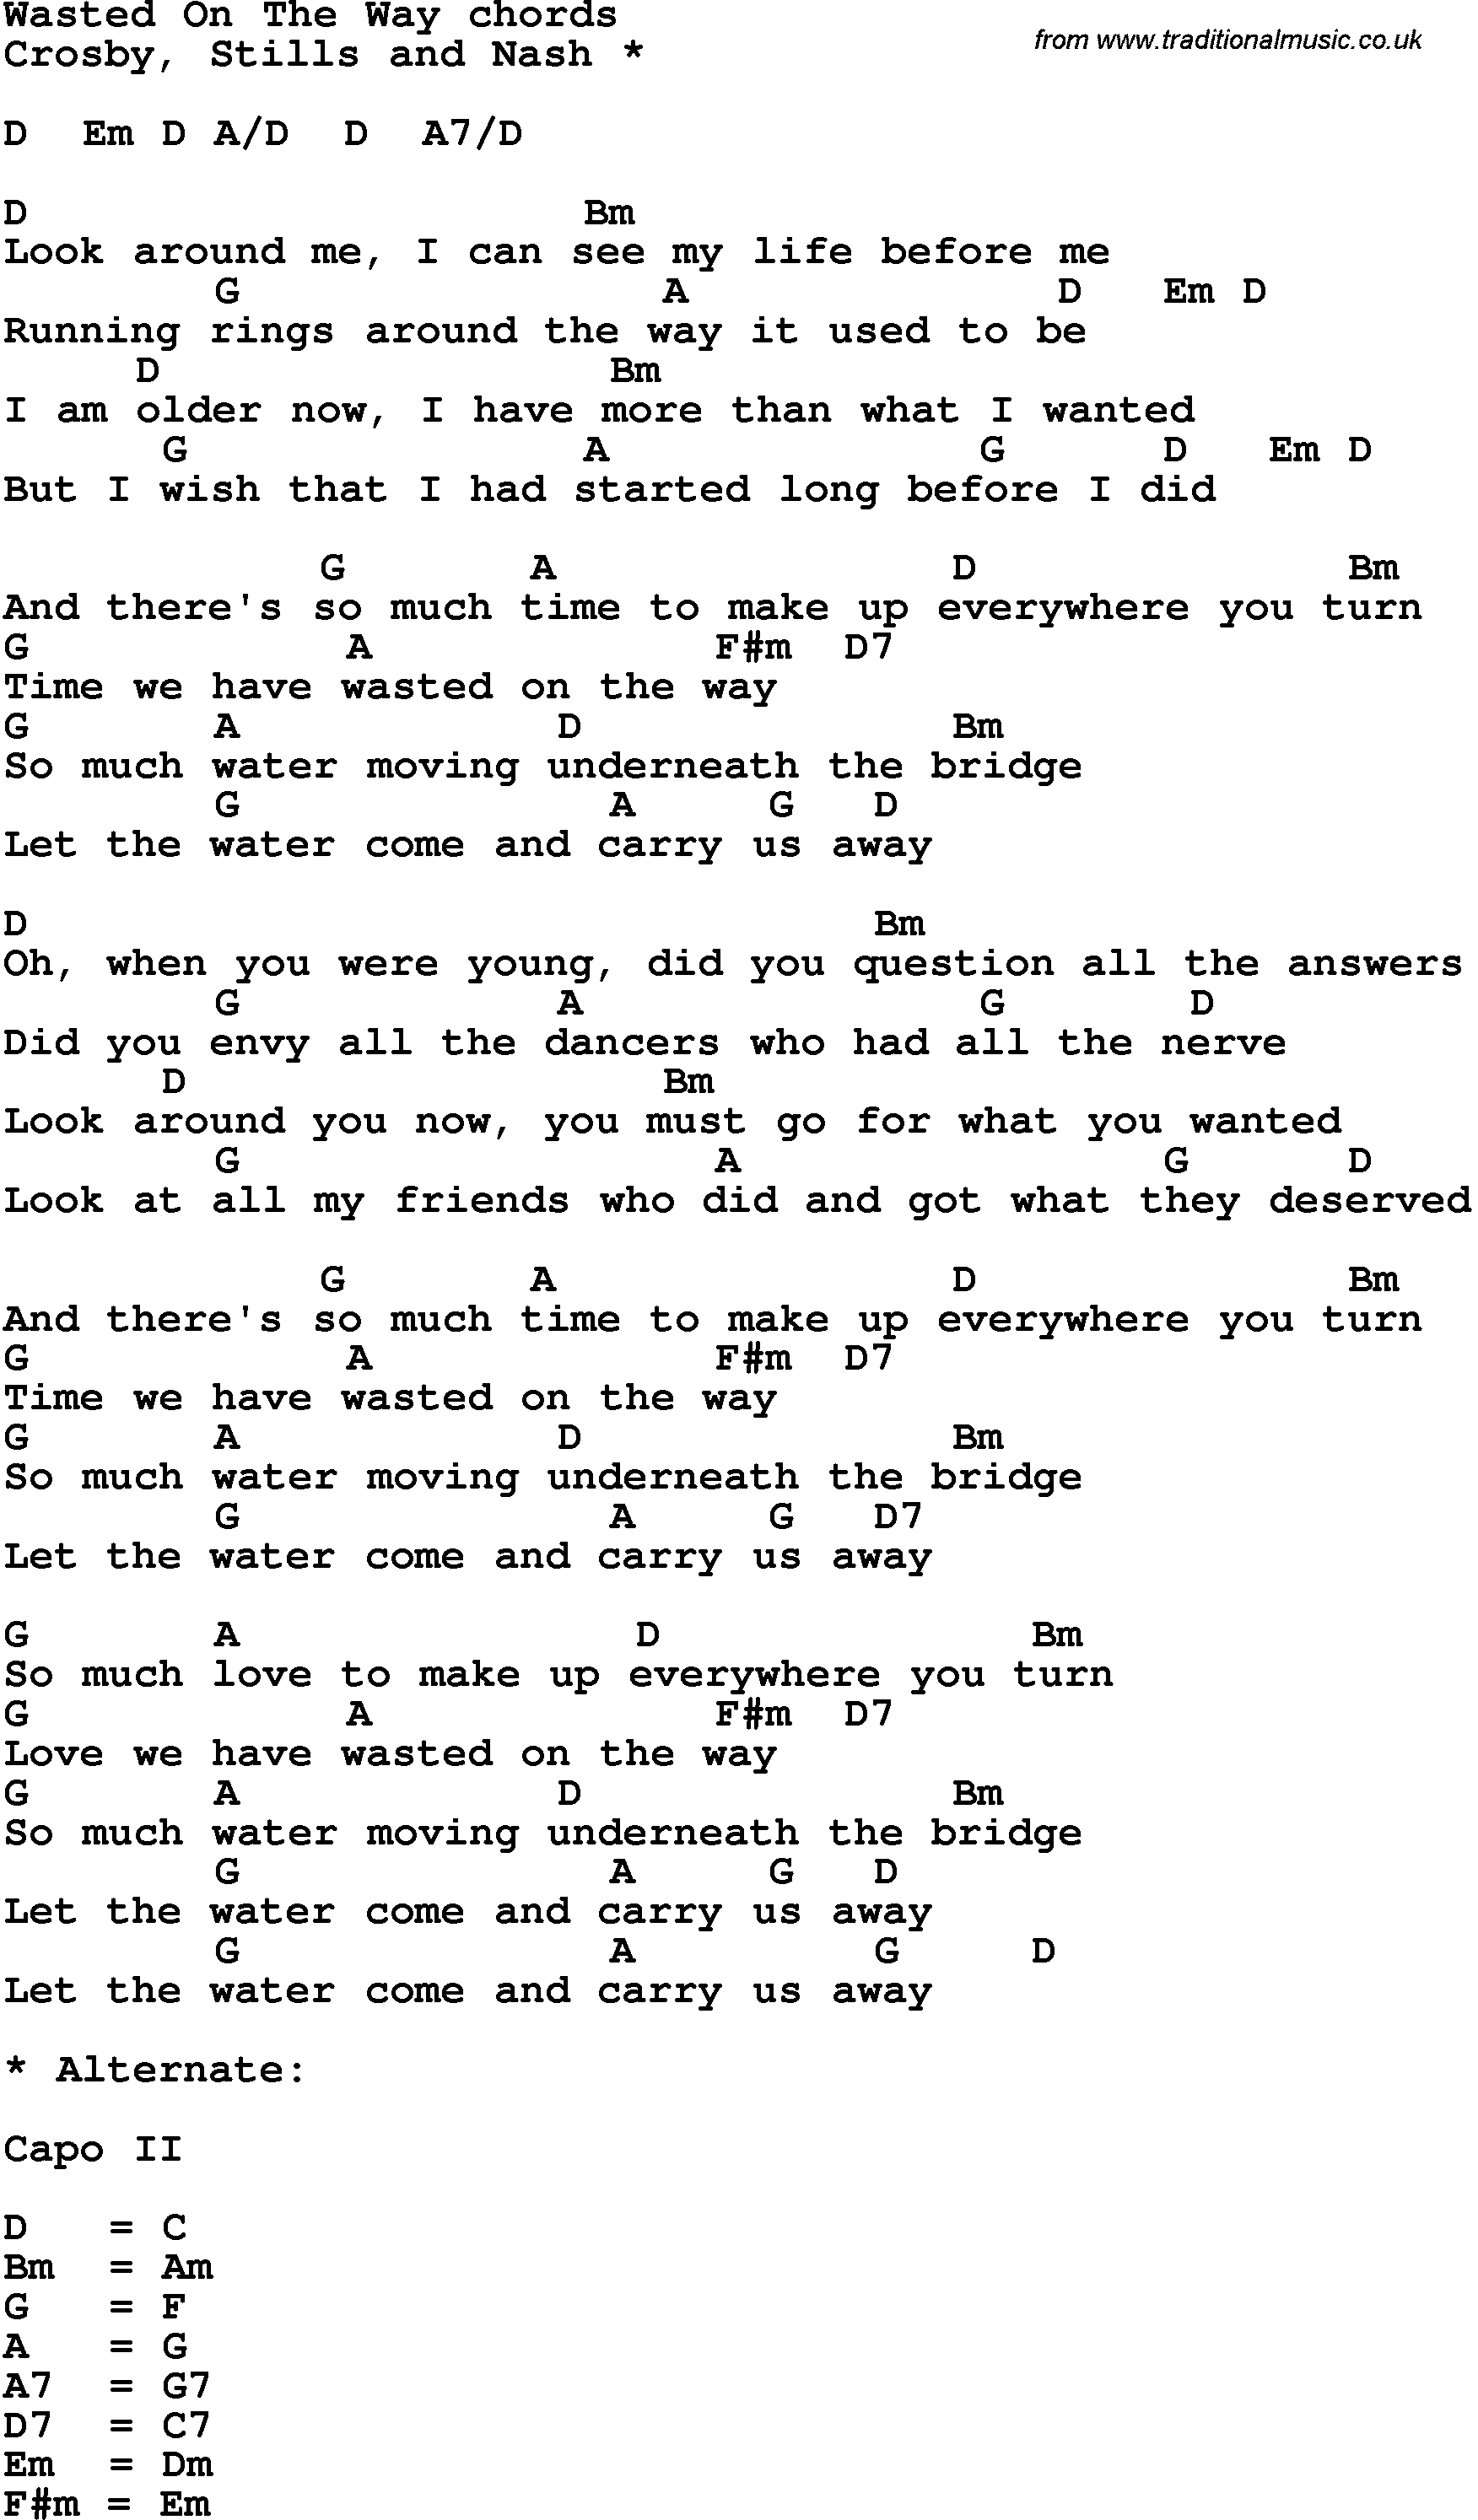 Song Lyrics with guitar chords for Wasted On The Way